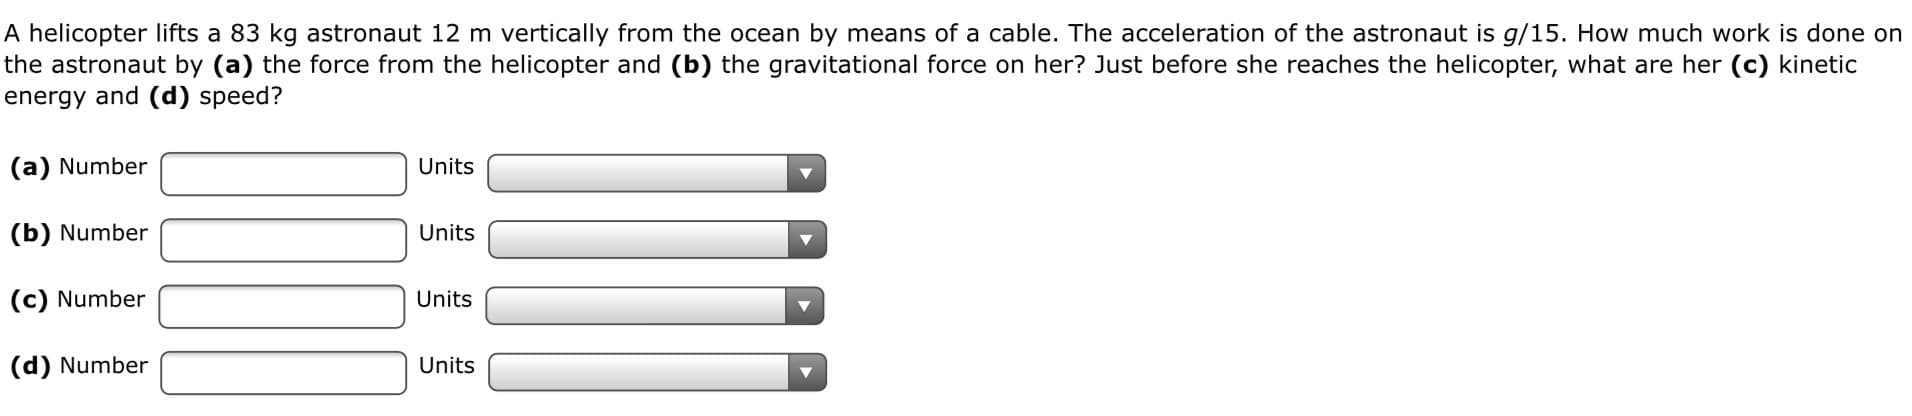 A helicopter lifts a 83 kg astronaut 12 m vertically from the ocean by means of a cable. The acceleration of the astronaut is g/15. How much work is done on
the astronaut by (a) the force from the helicopter and (b) the gravitational force on her? Just before she reaches the helicopter, what are her (c) kinetic
energy and (d) speed?
(a) Number
Units
(b) Number
Units
(c) Number
Units
(d) Number
Units
